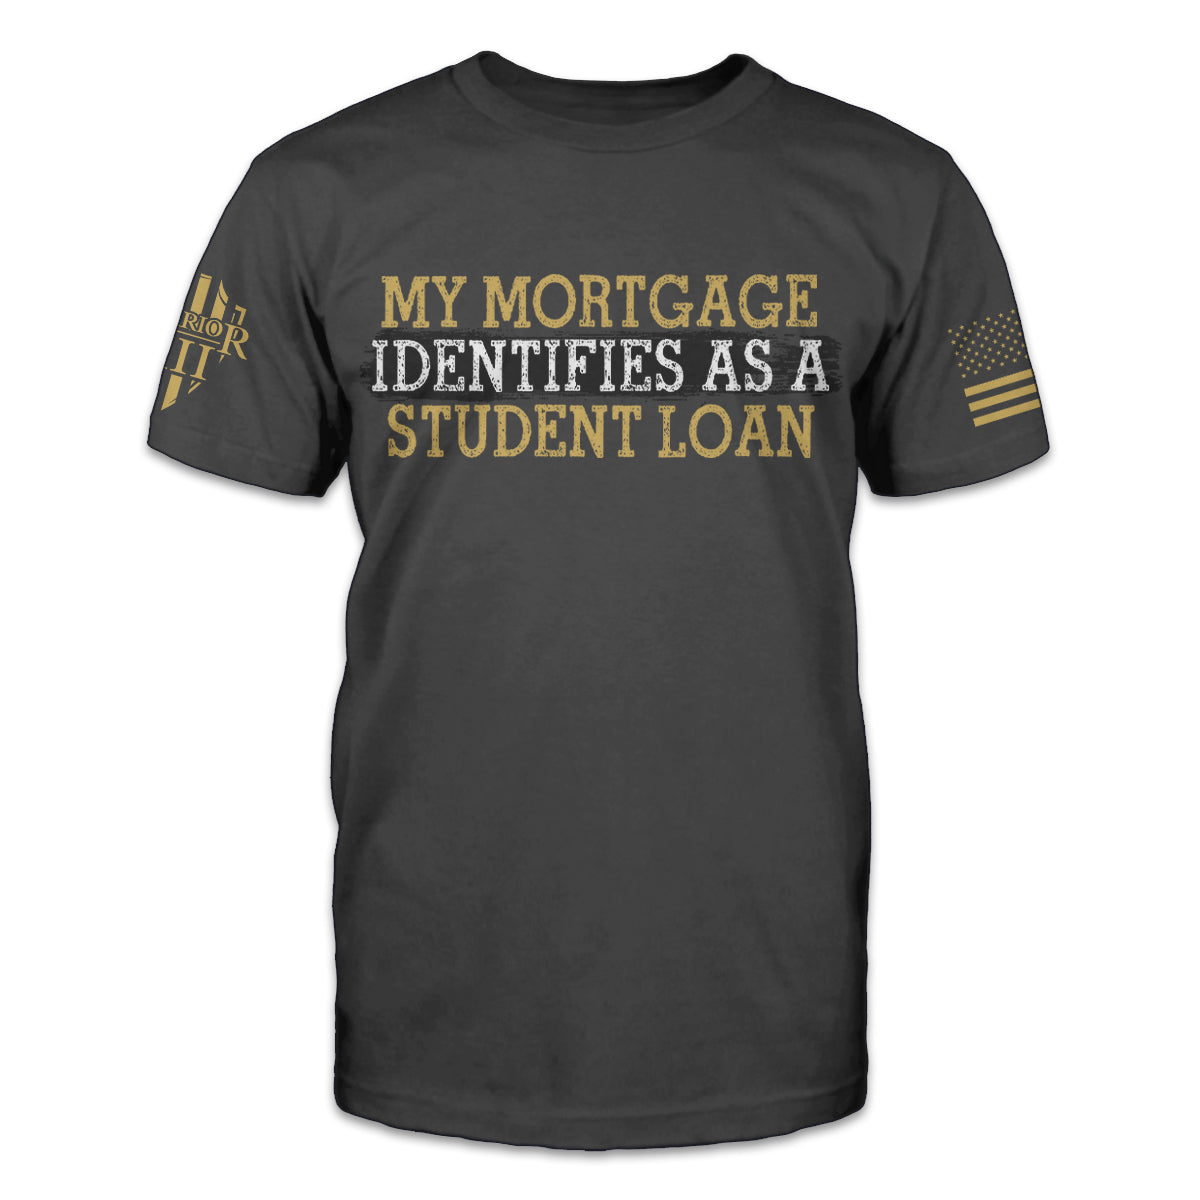 A dark grey shirt with the words "my mortgage identifies as a student loan" printed on the front of the shirt.,